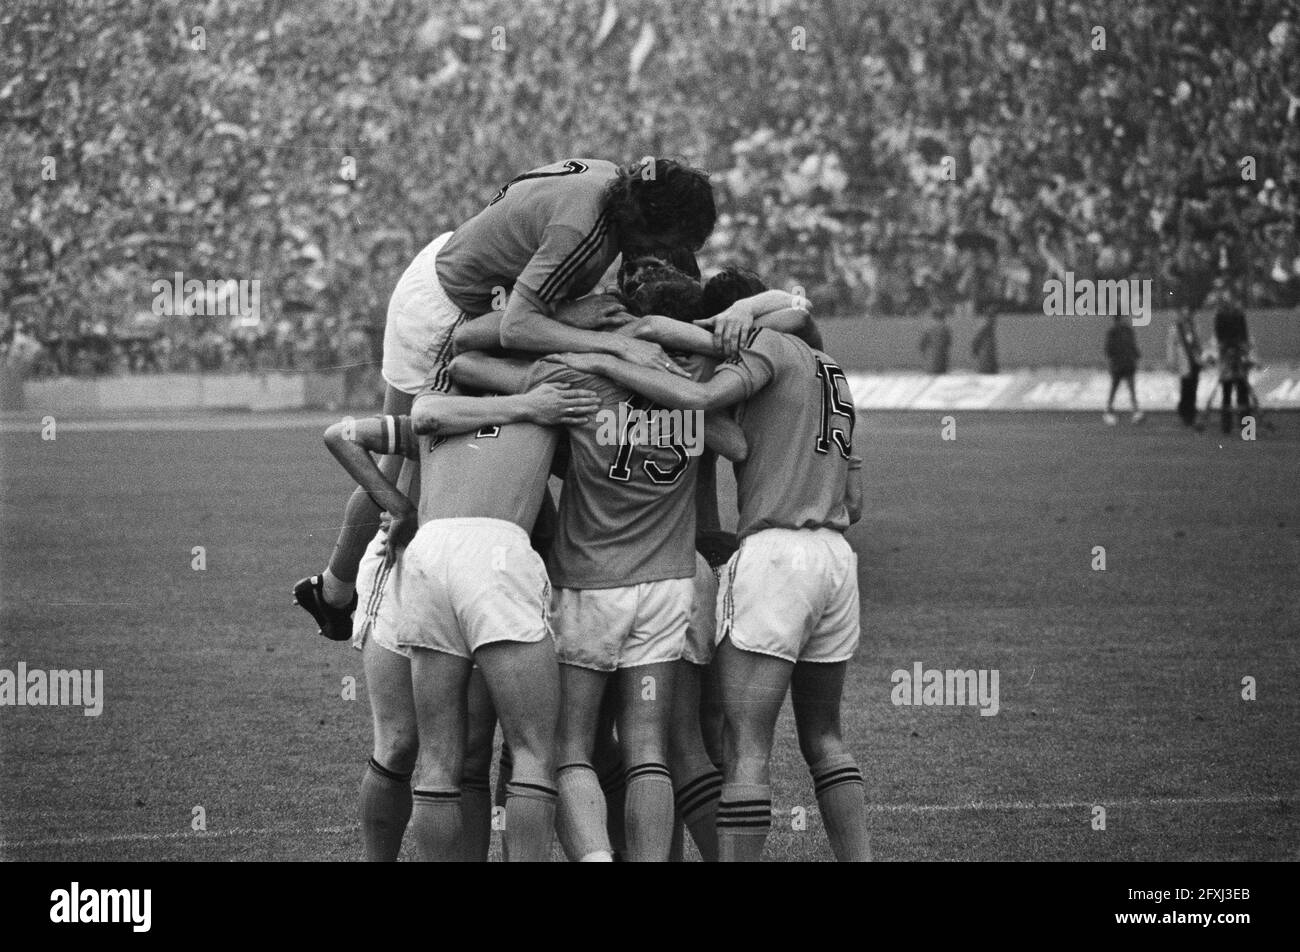 N goal Black and White Stock Photos & Images - Alamy